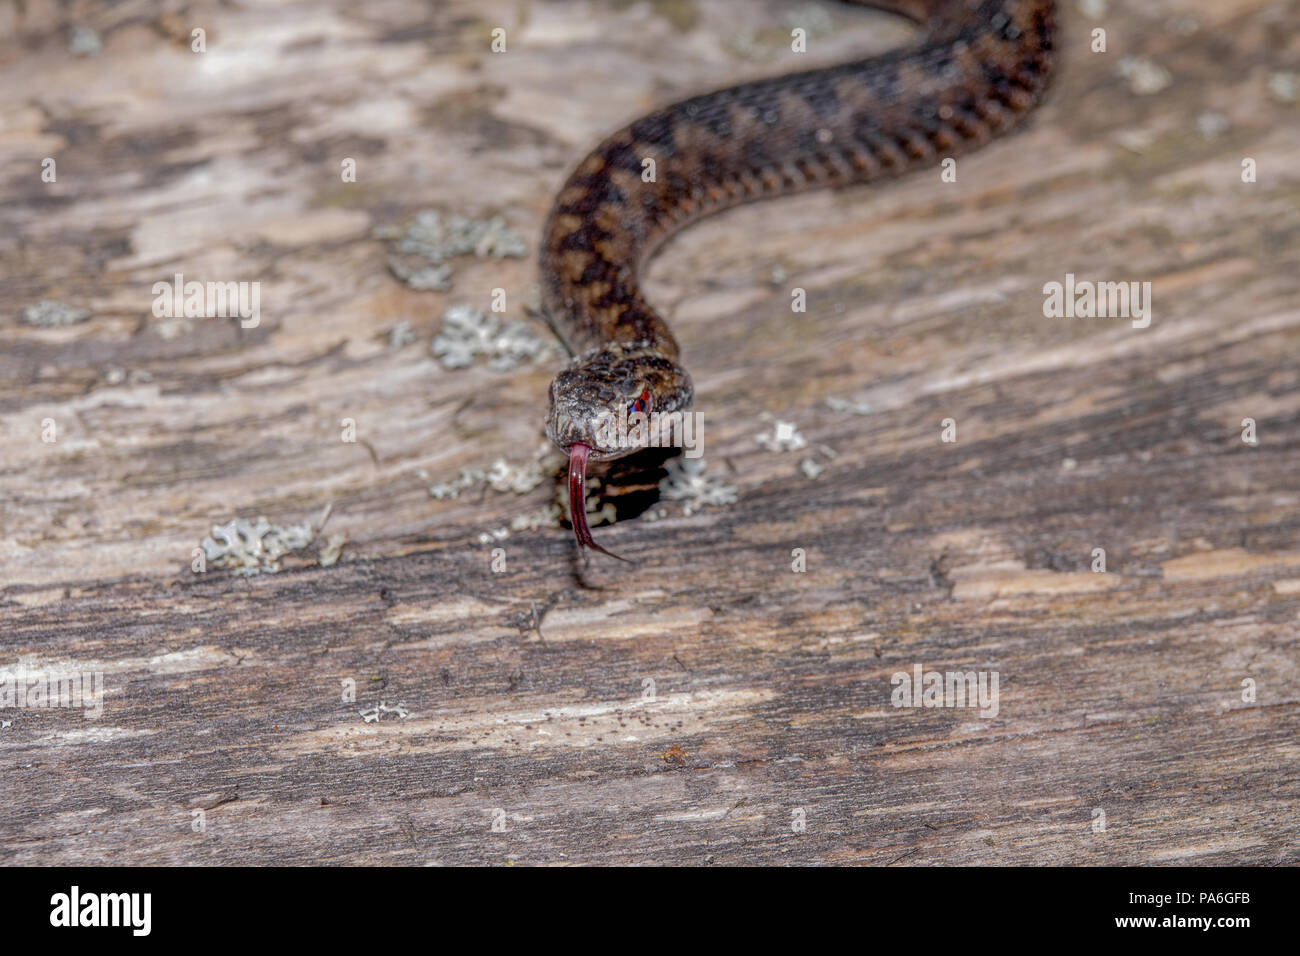 The Northern Viper ore common adder is one of the most wide spread terrestial snakes Stock Photo